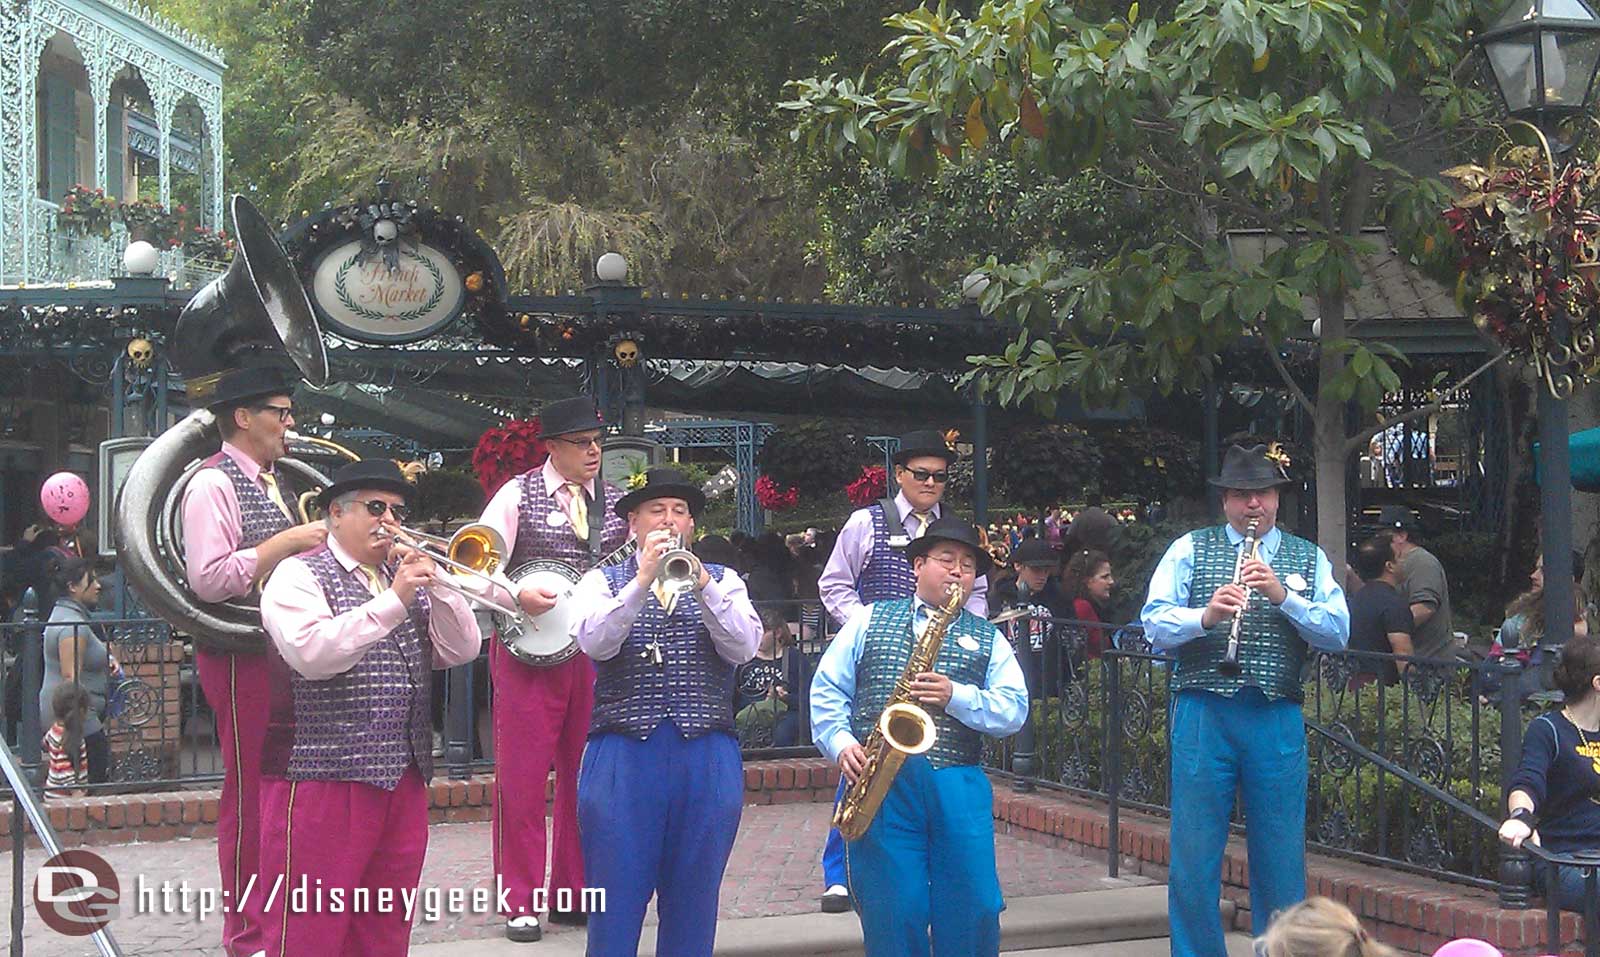 The Jambalaya Jazz entertaining the crowd in New Orleans Square